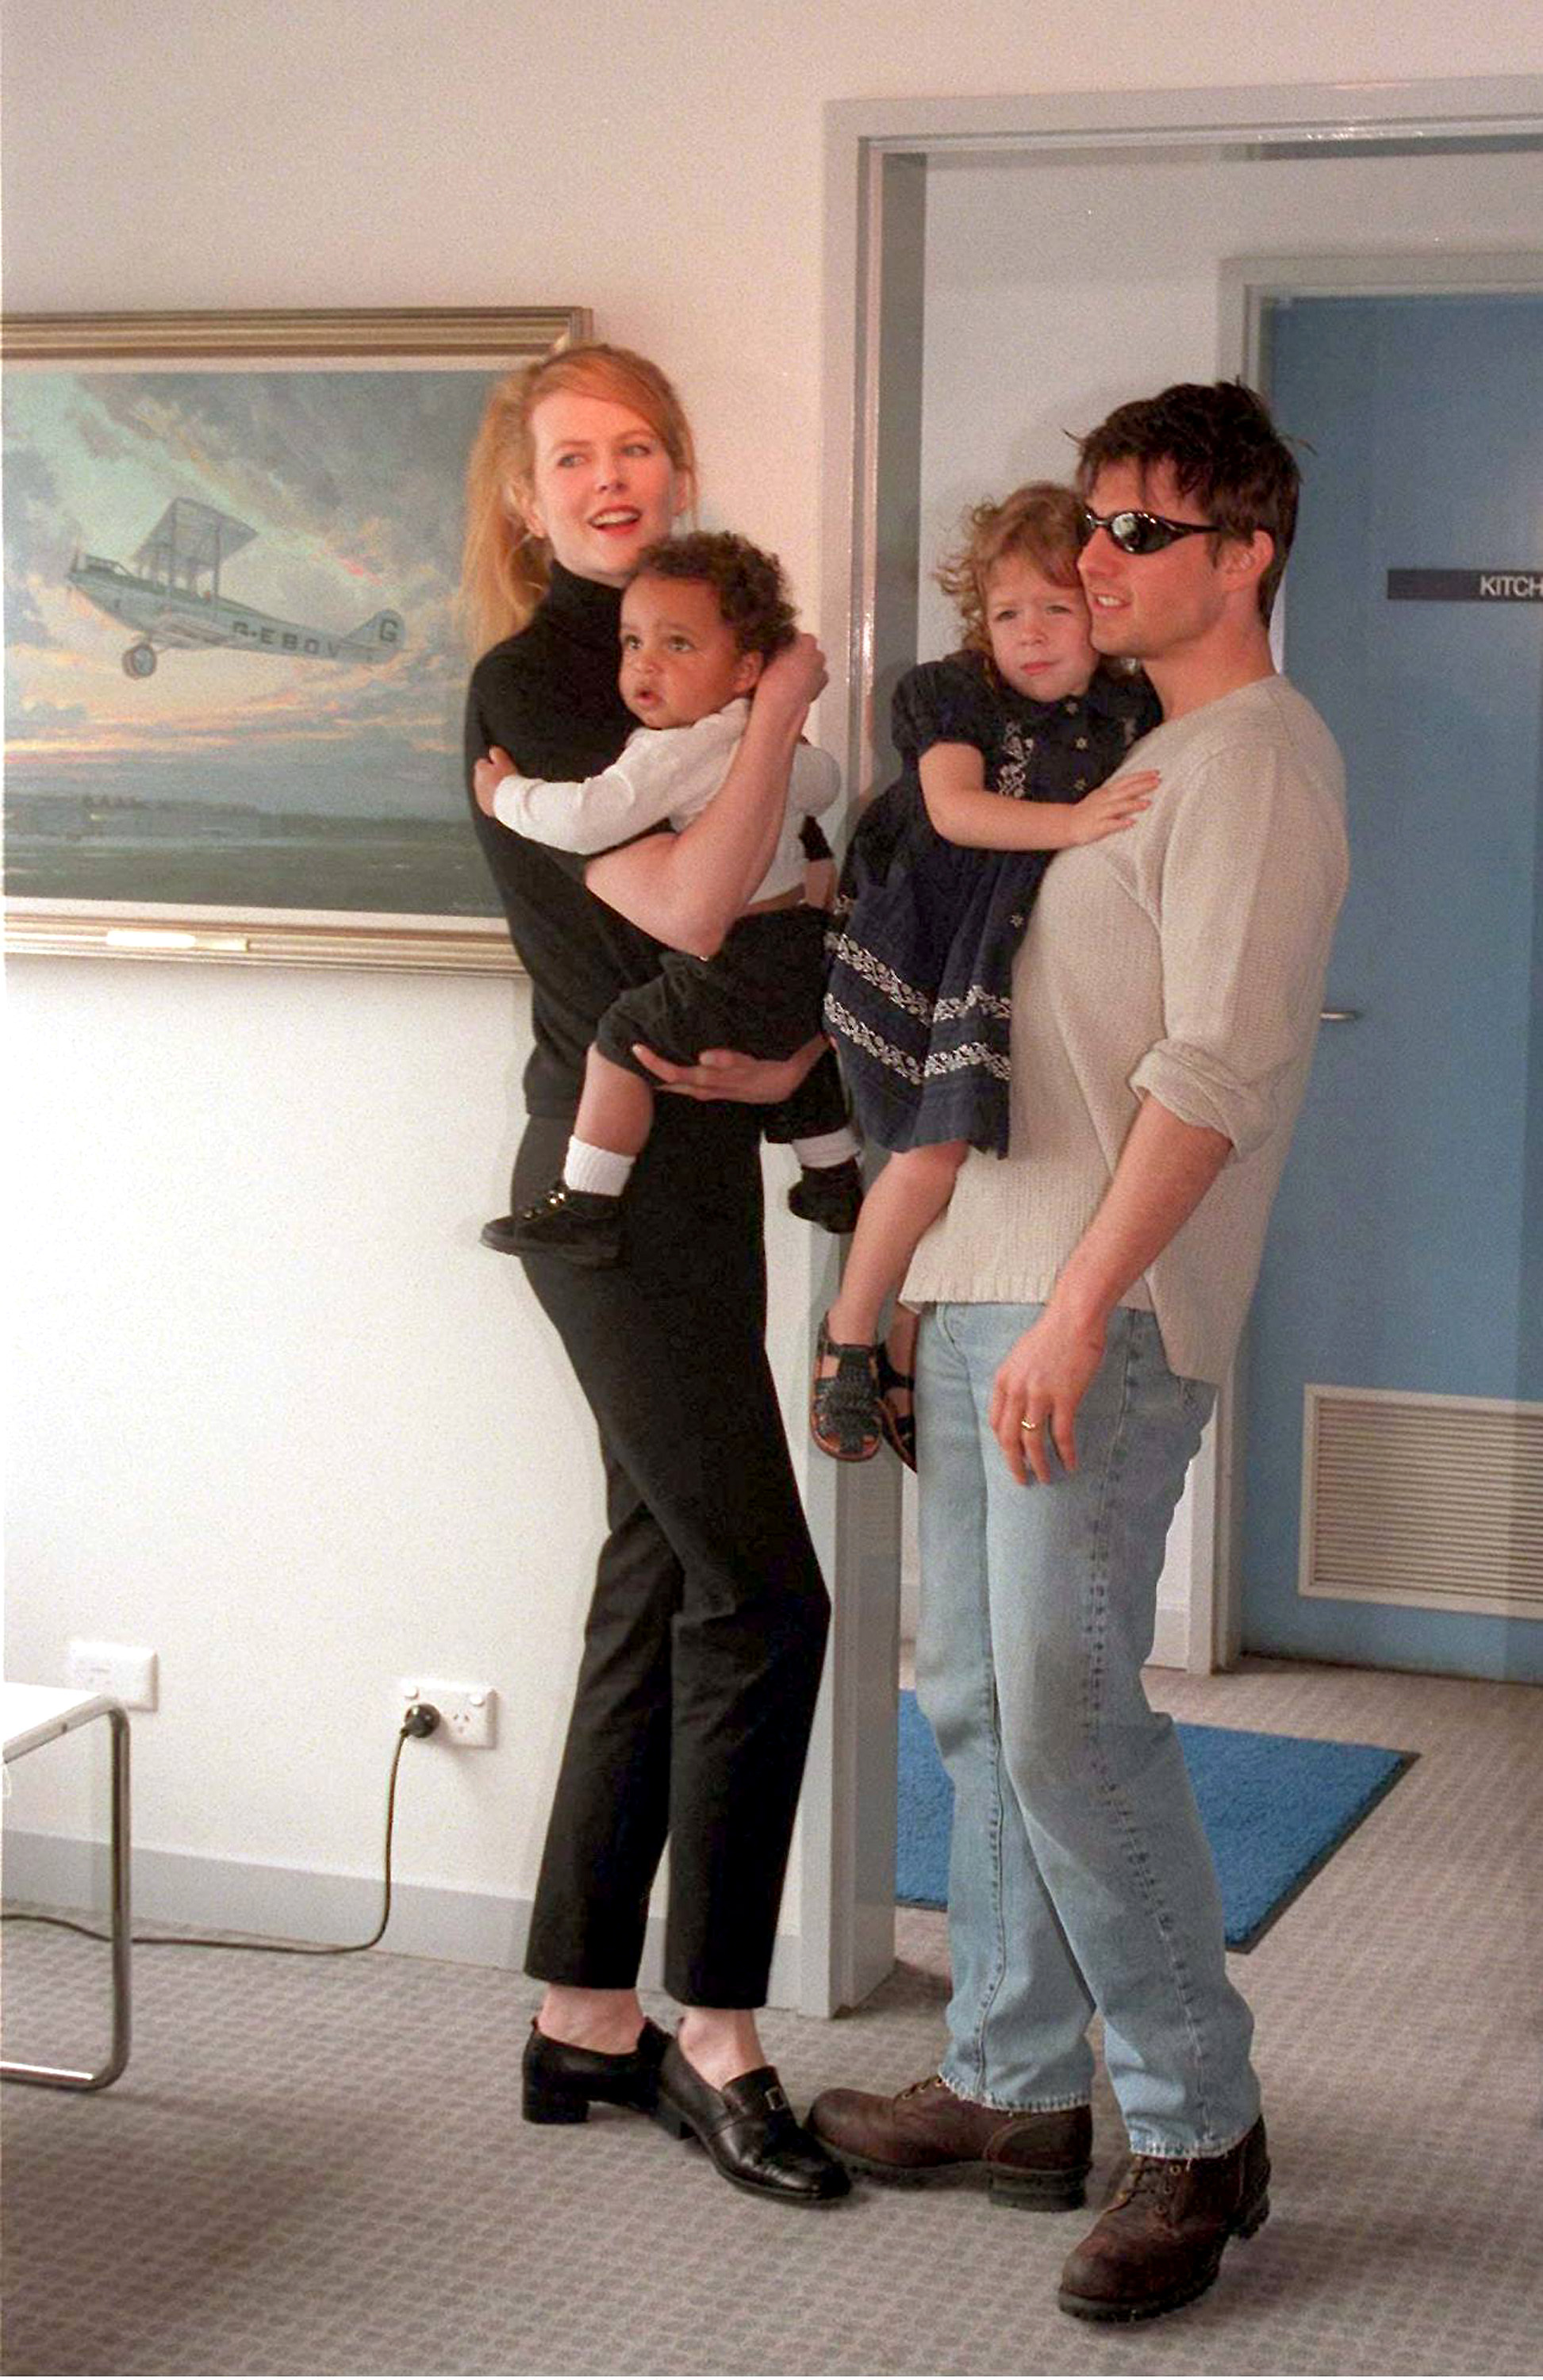 Nicole Kidman and Tom Cruise at Sydney Kingsford Smith airport with their children Connor and Isabella on January 24, 1996 in Sydney, Australia | Source: Getty Images